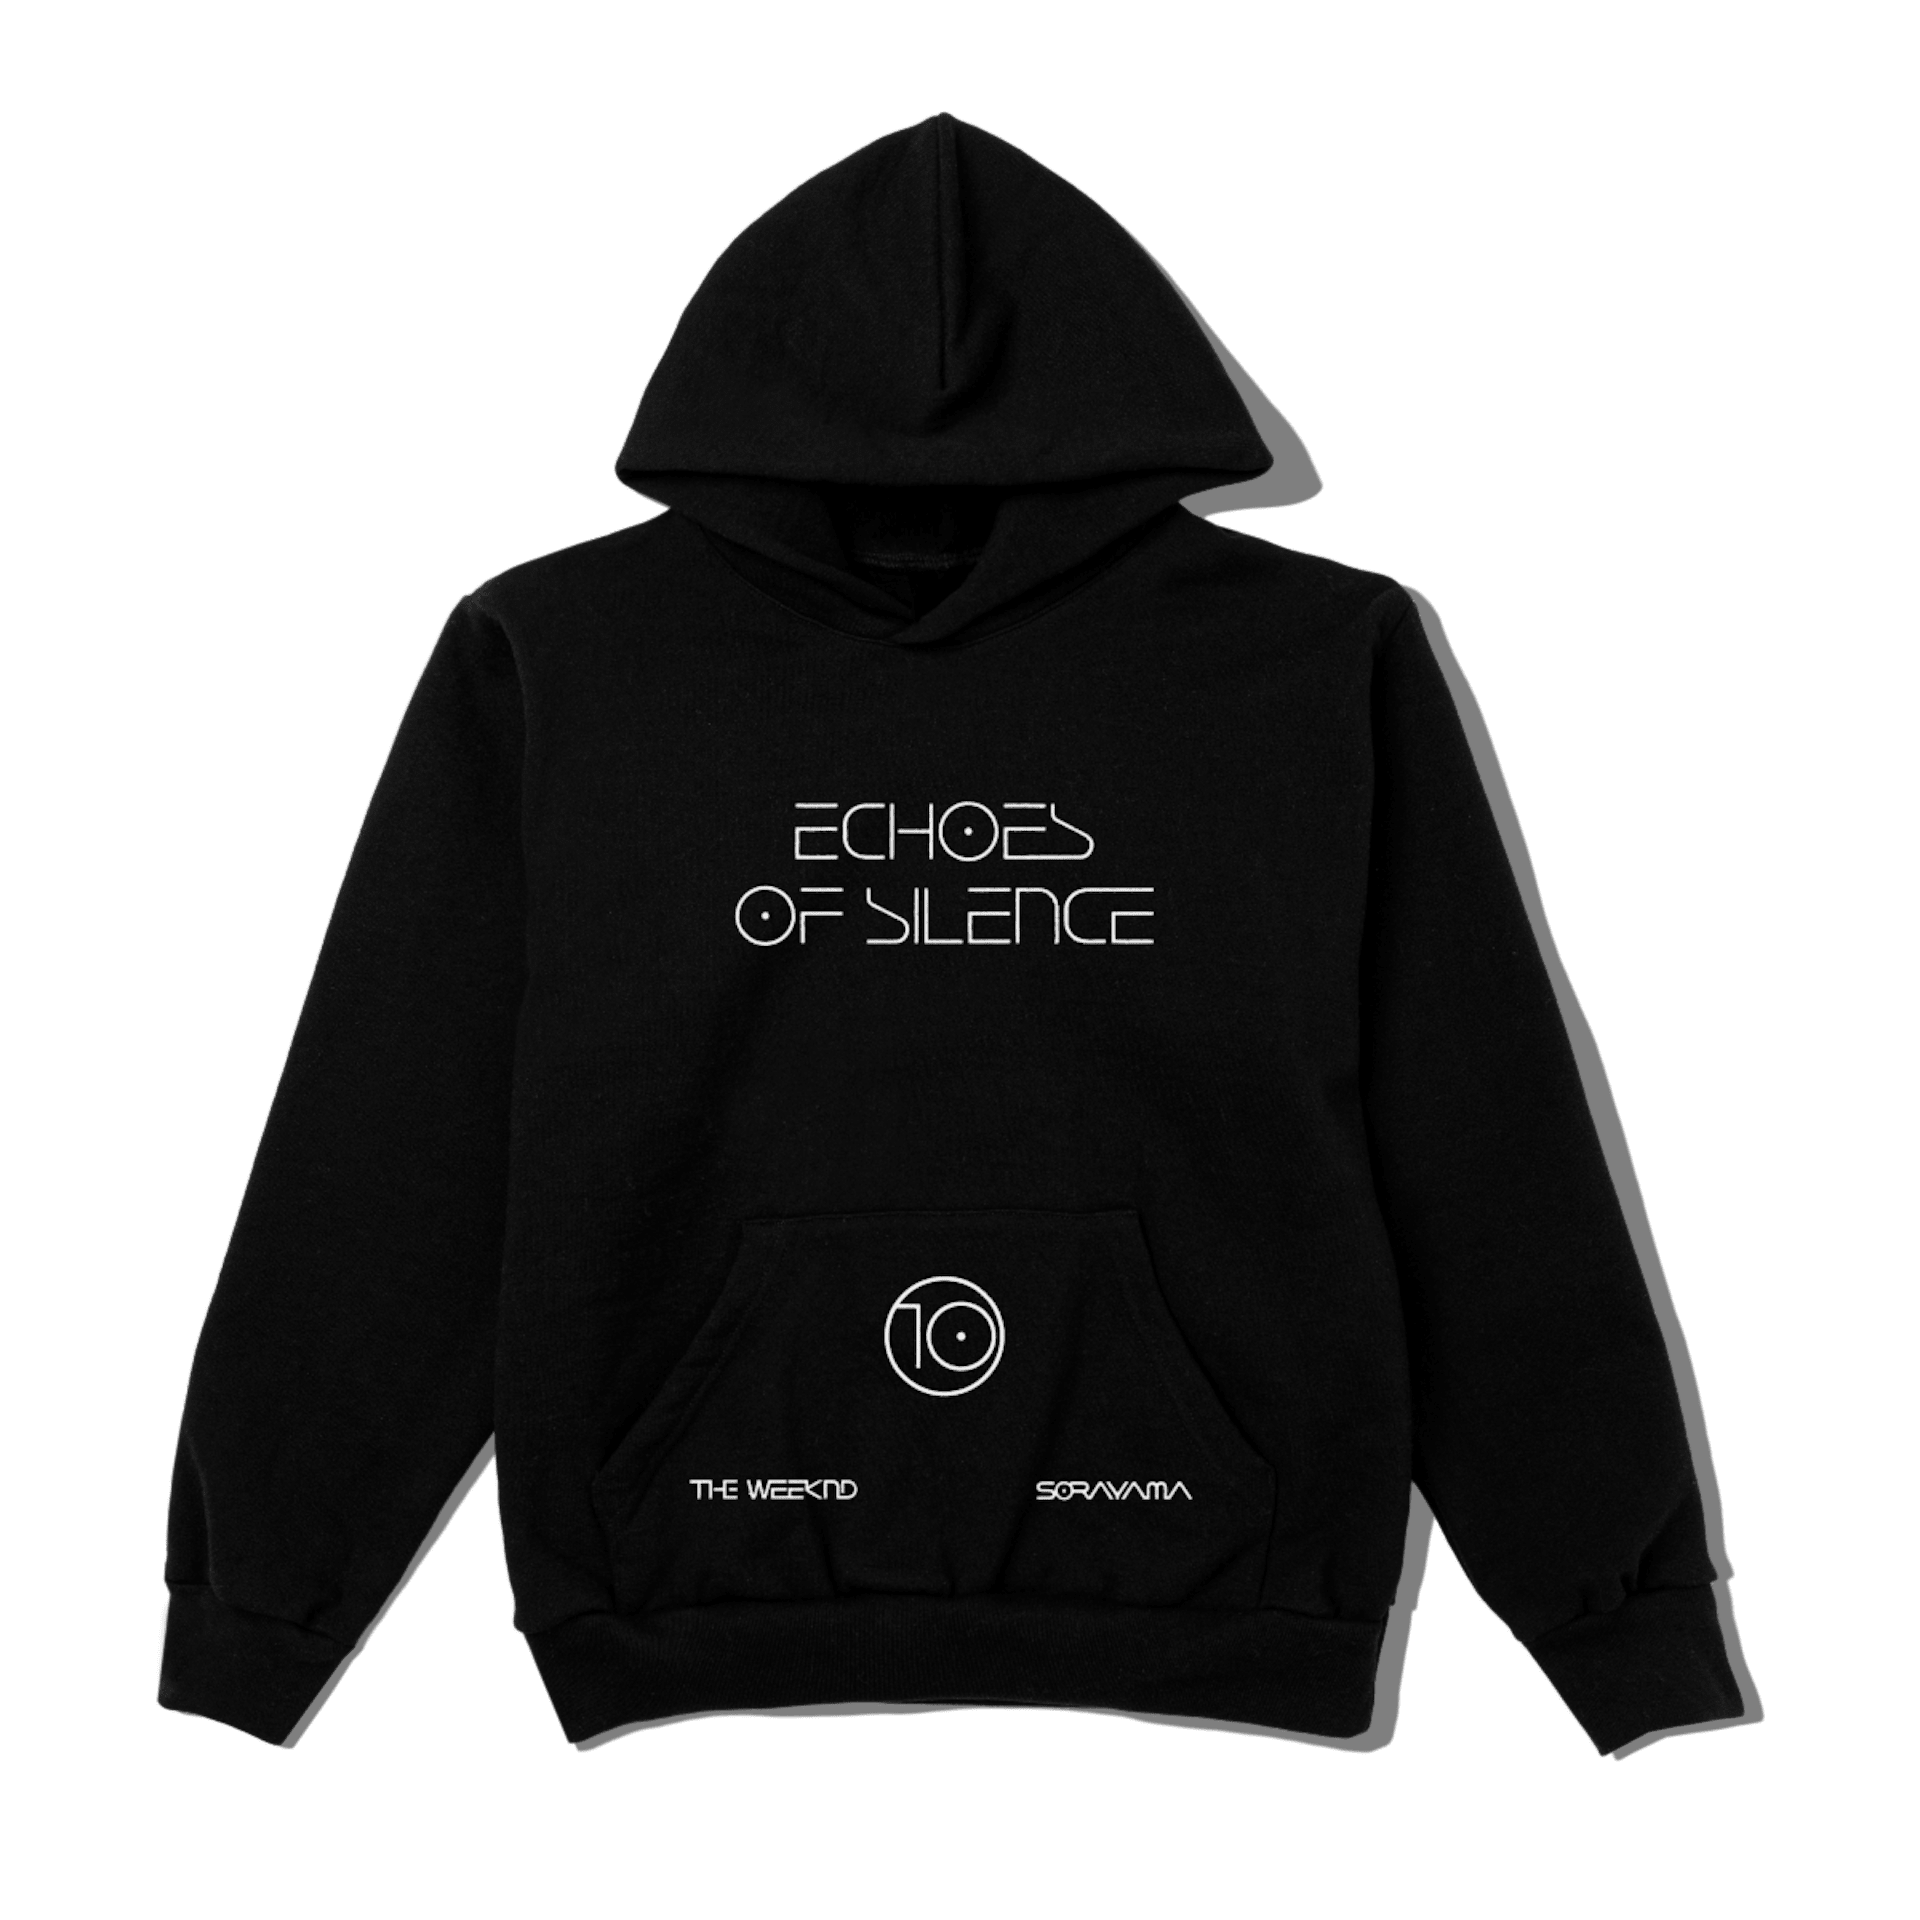 Photo of The Weeknd capsule collection